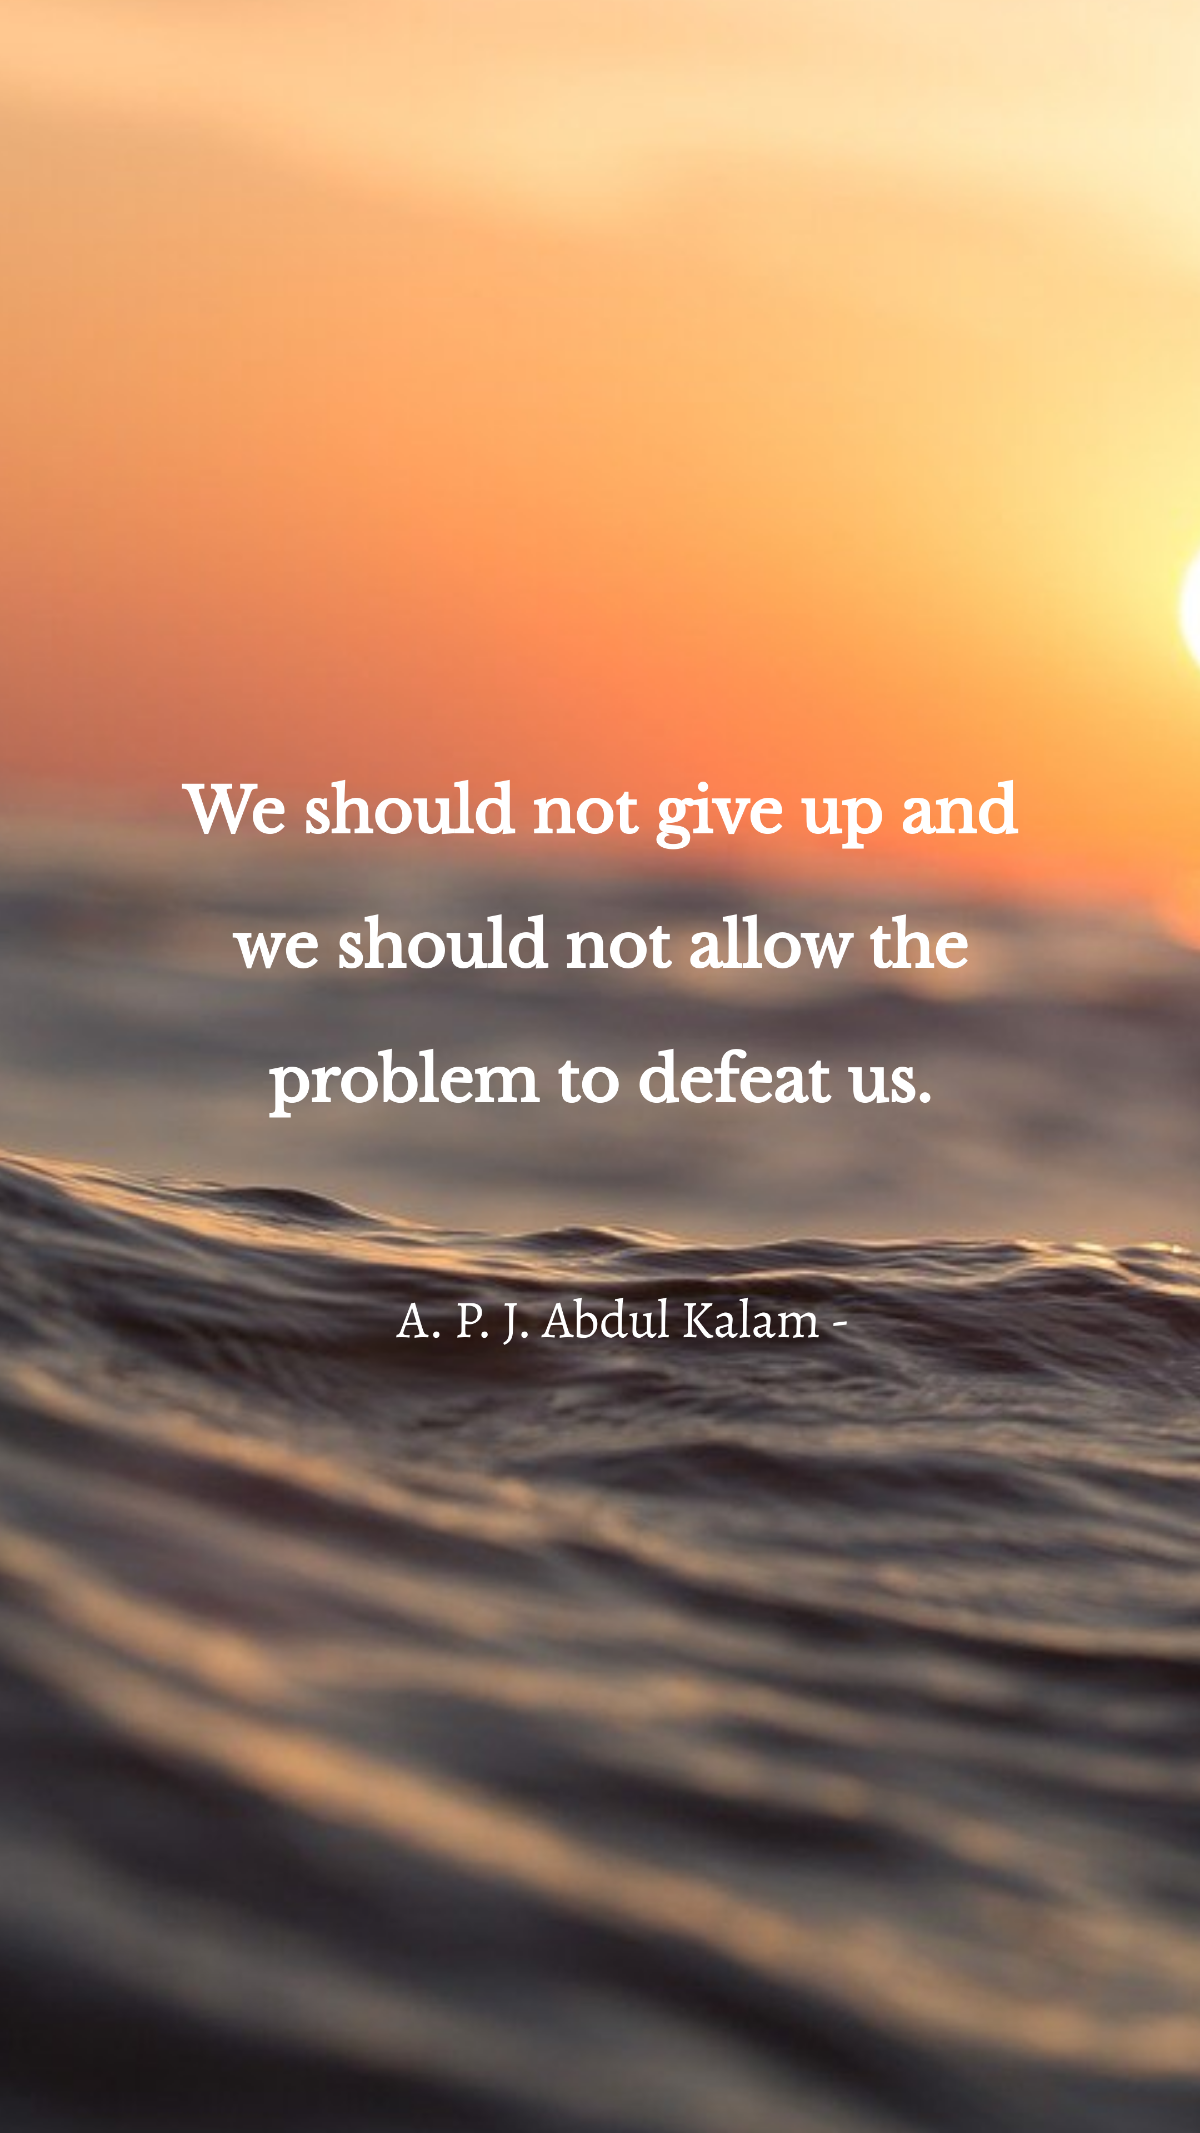 A. P. J. Abdul Kalam - We should not give up and we should not allow the problem to defeat us. Template